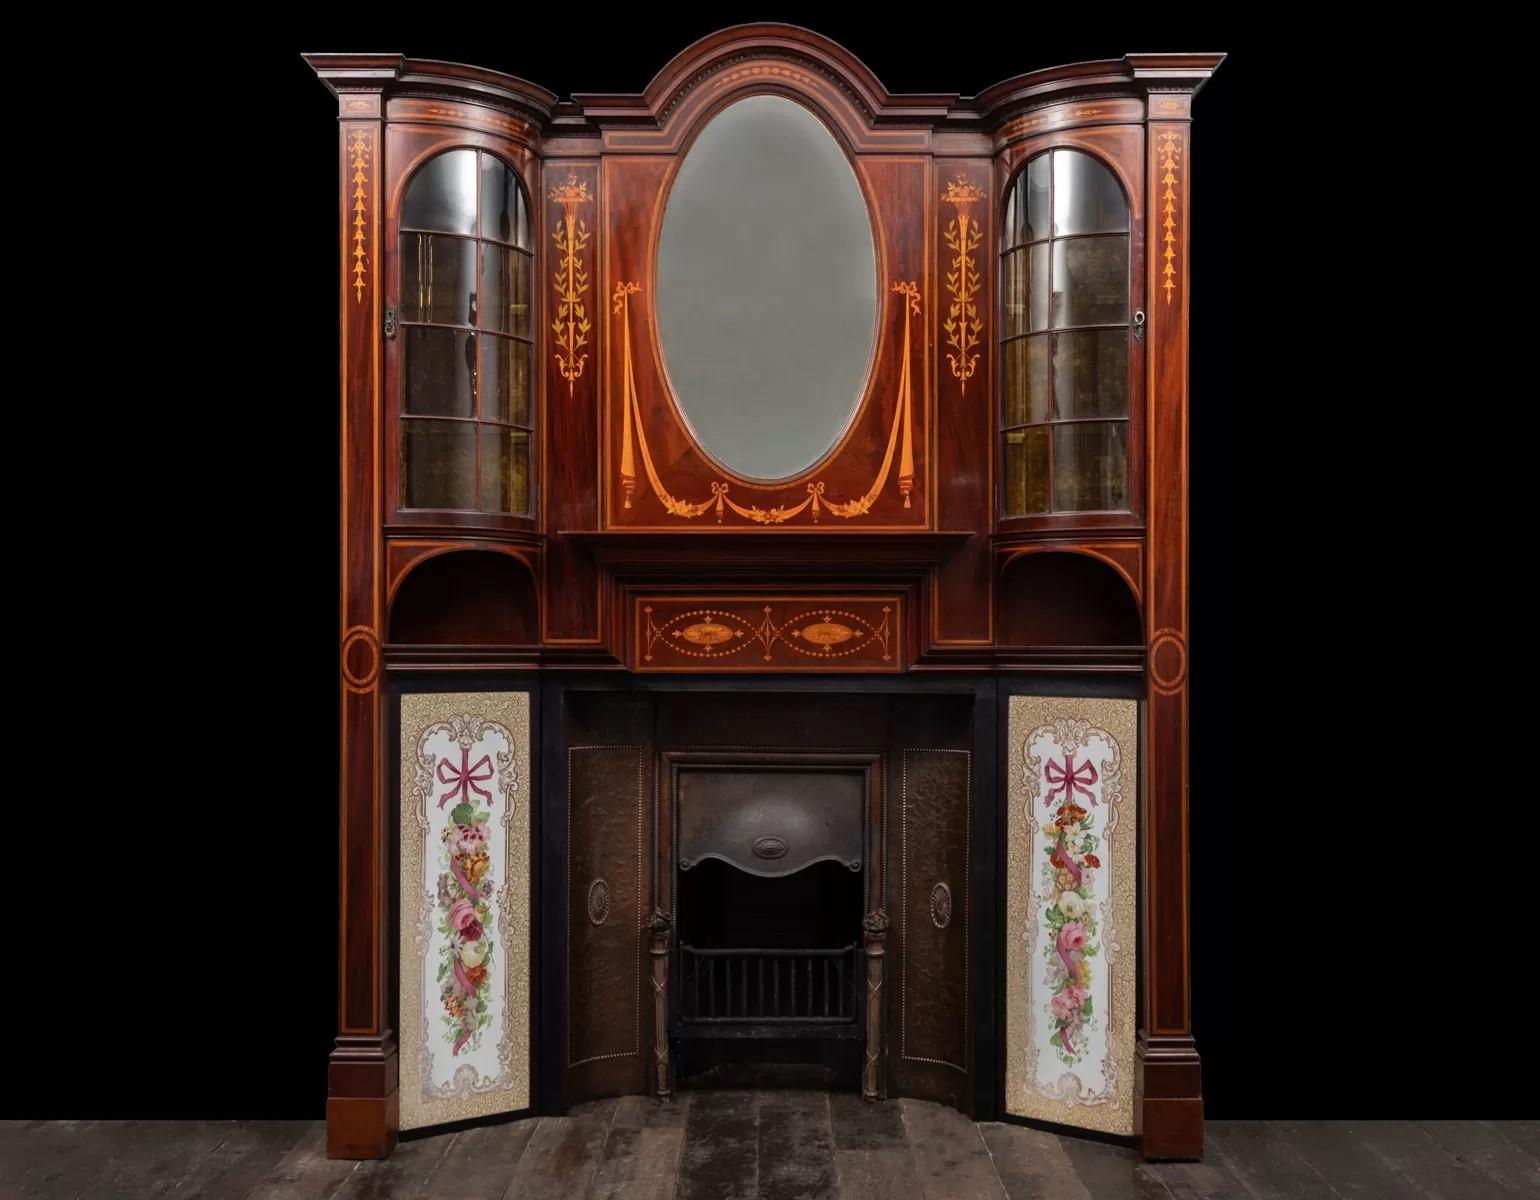 An outstanding antique Sheraton revival wooden fireplace with original hand painted Dolton Lambeth panels and copper insert.
Constructed using the finest figured dark wood with satinwood, boxwood and fruitwood neo-classical style inlays. The glazed